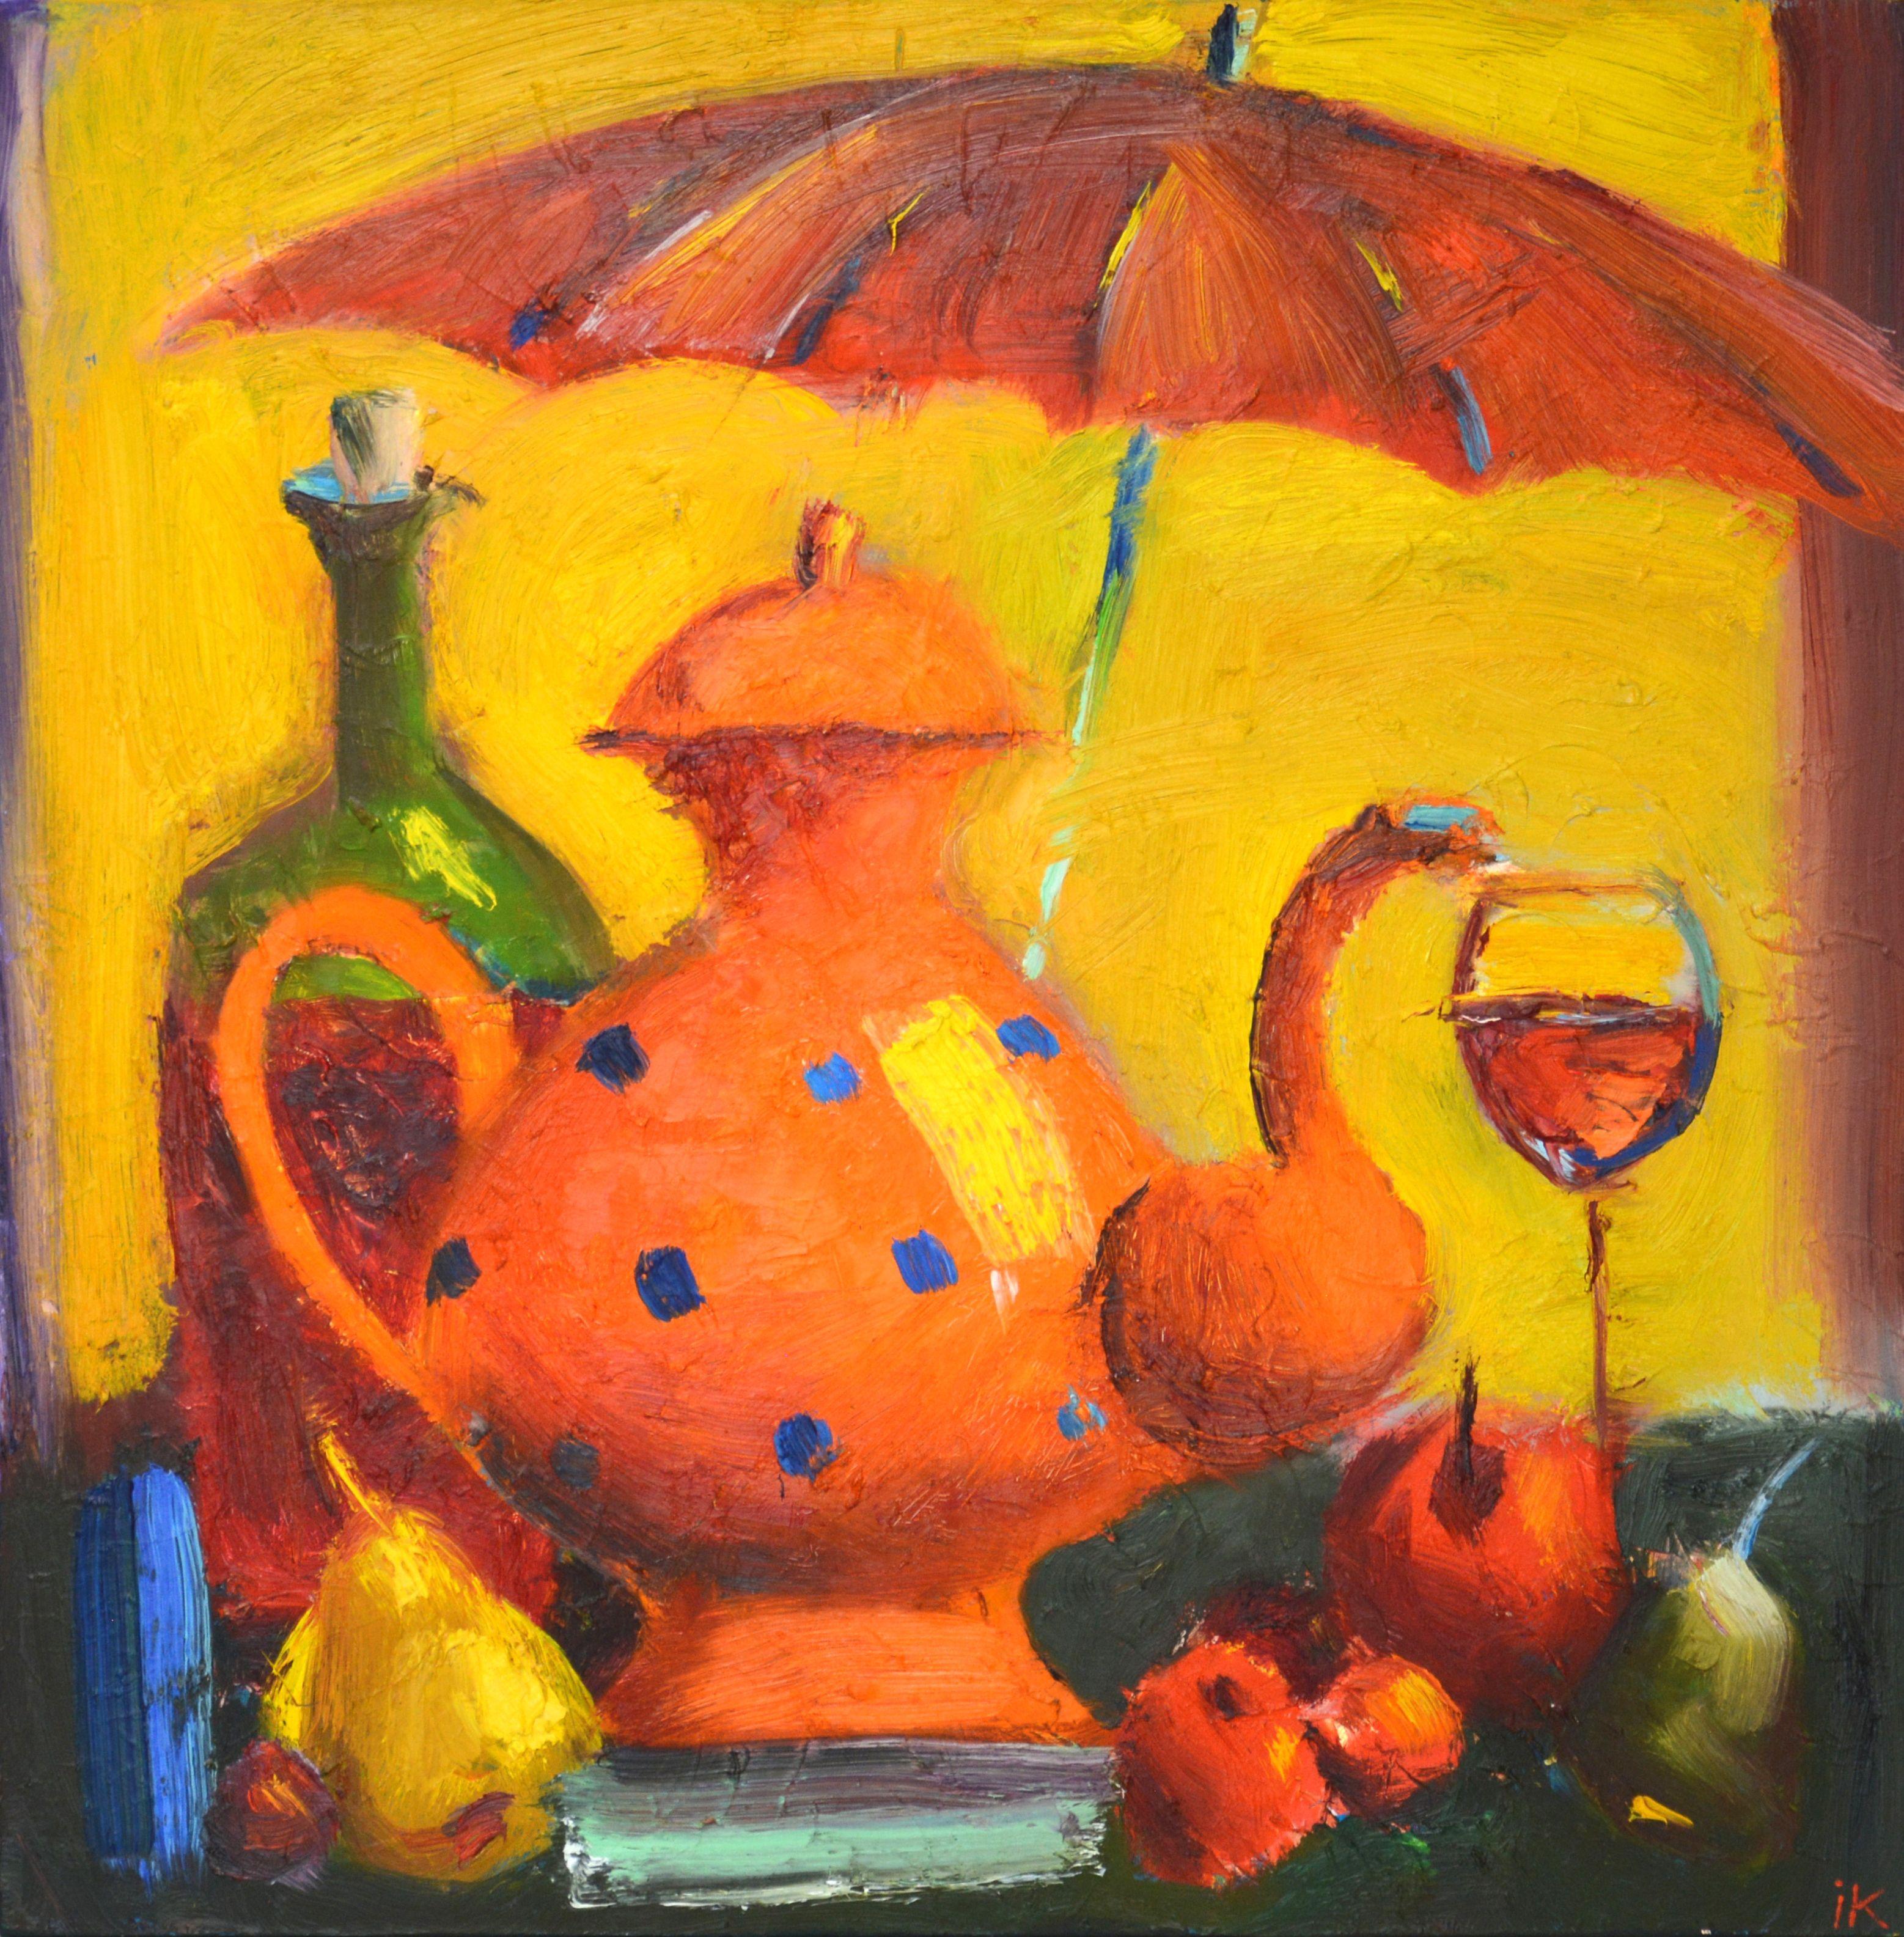 Orange teapot with blue peas, apples, pears, a bottle of wine, a glass, a red umbrella on a yellow background.   The painting was painted expressively with brushes and a spatula.  Part of an ongoing series of colorful decorative still lifes. The